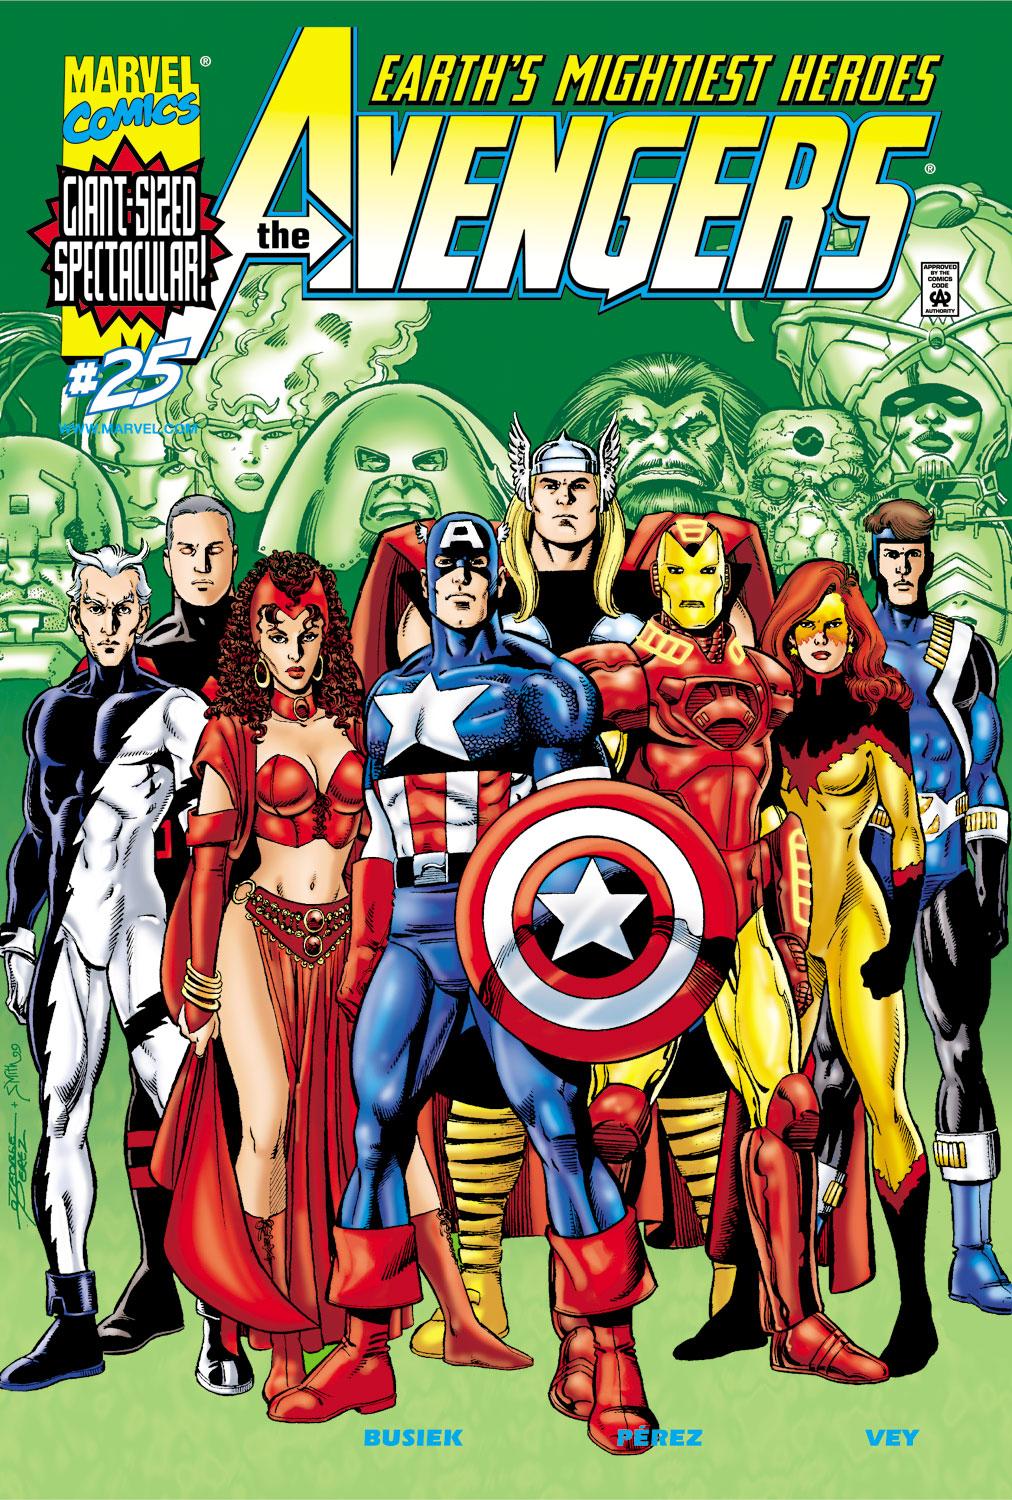 Collecting The Avengers Vol. 2 (1996-1997) & Vol. 3 (1998-2005) as ...